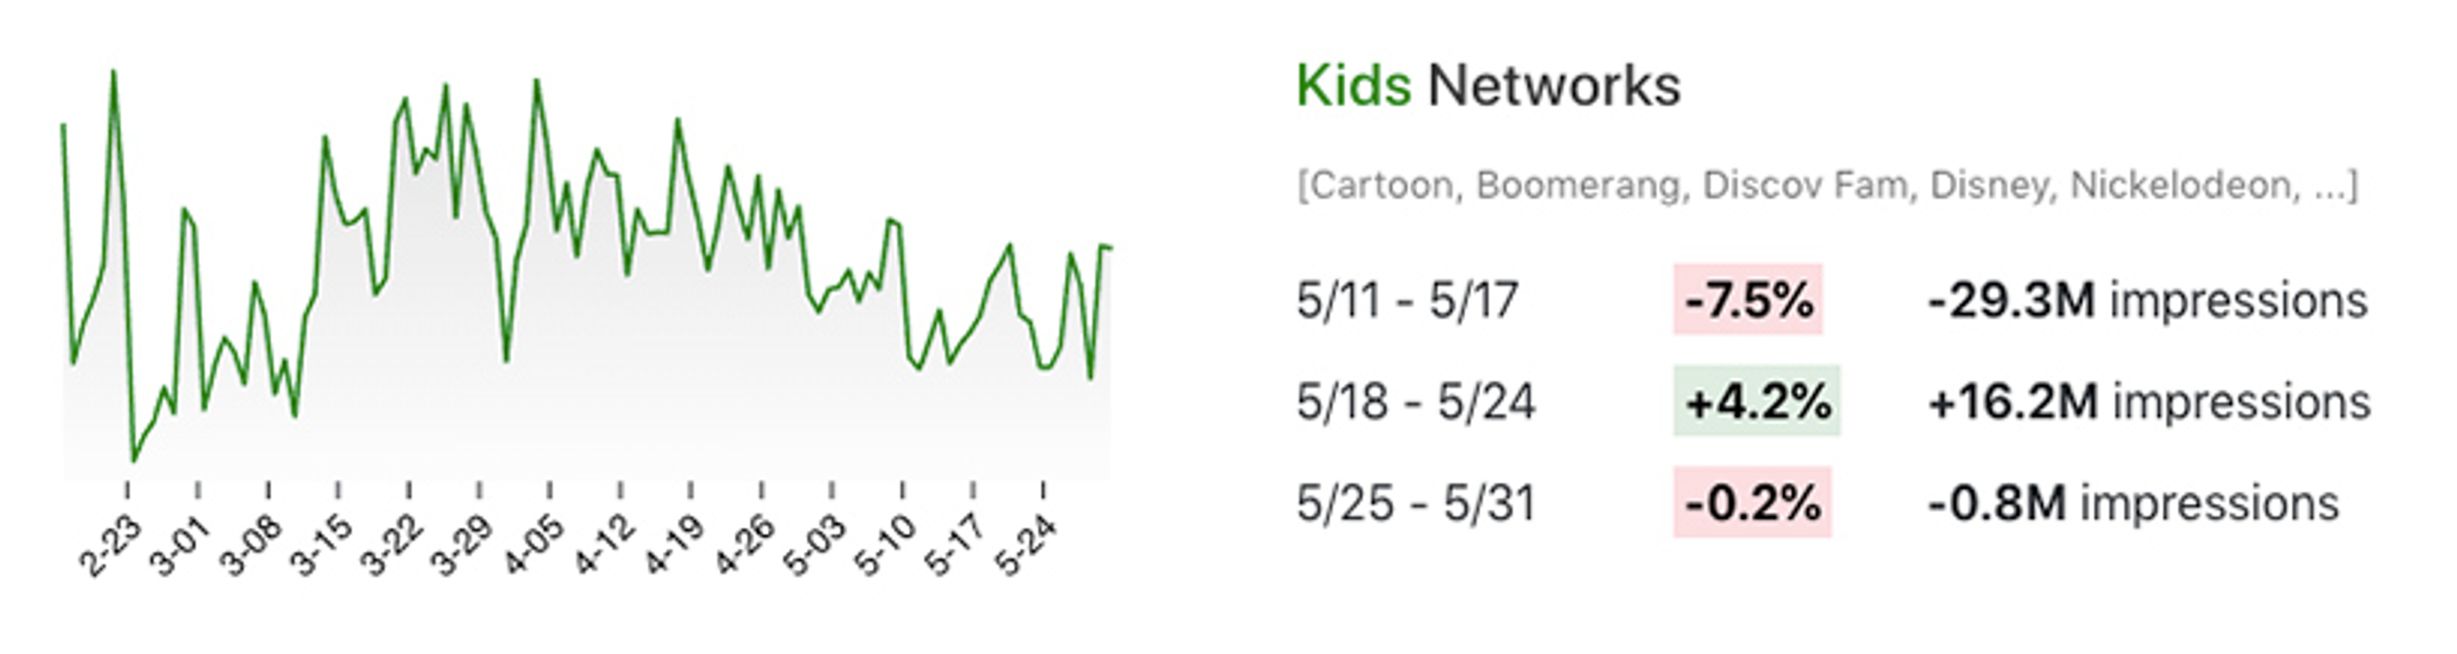 Viewership changes for kids networks in May 2020.